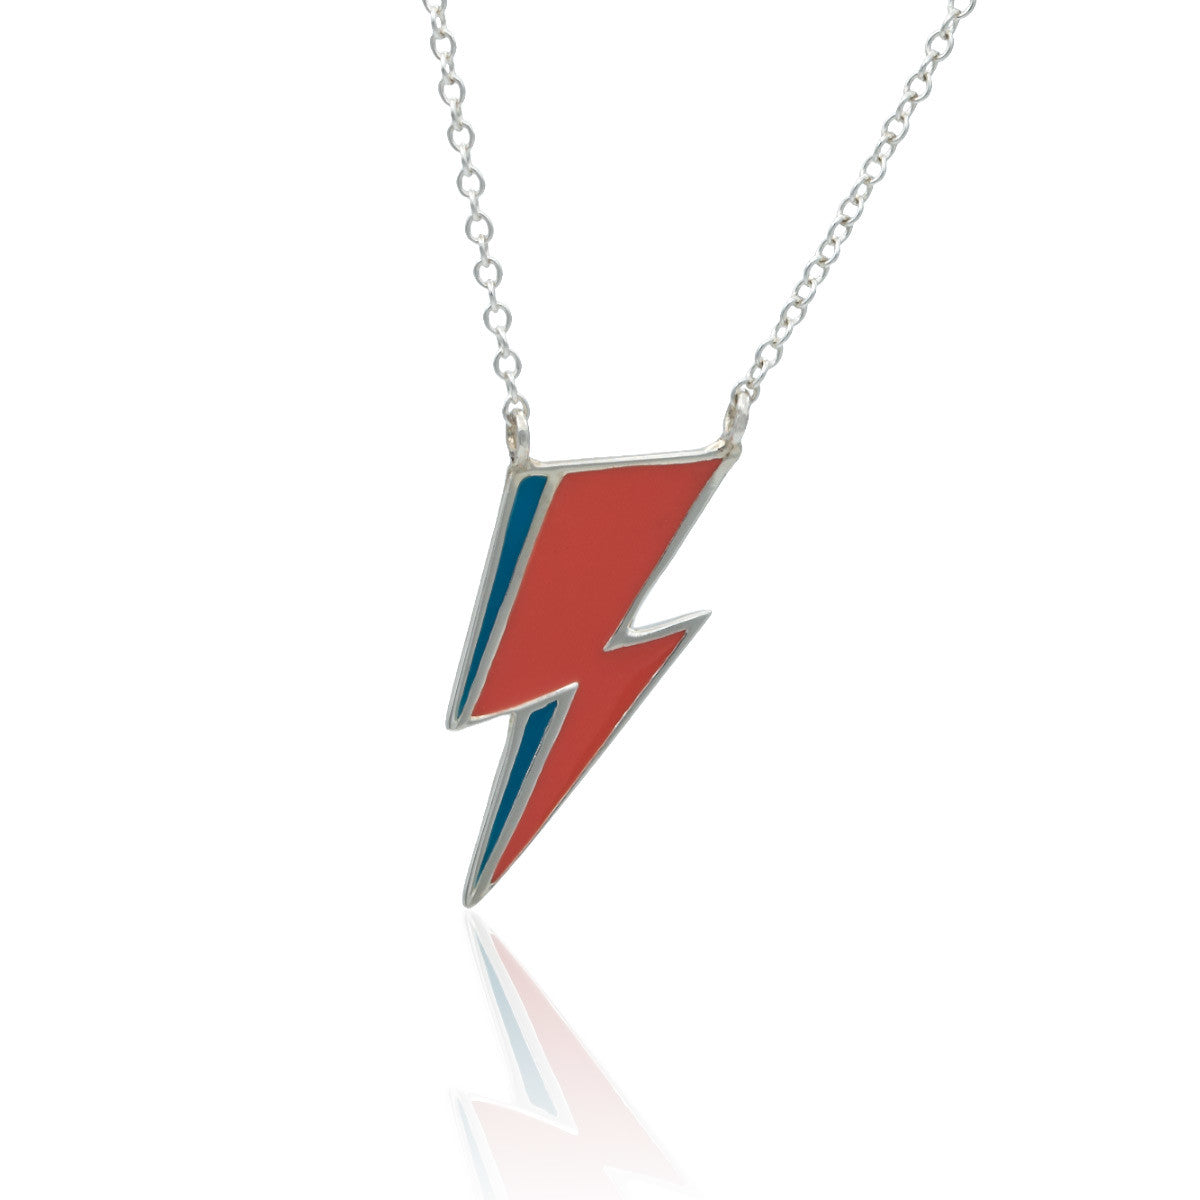 Bolt necklace in sterling silver